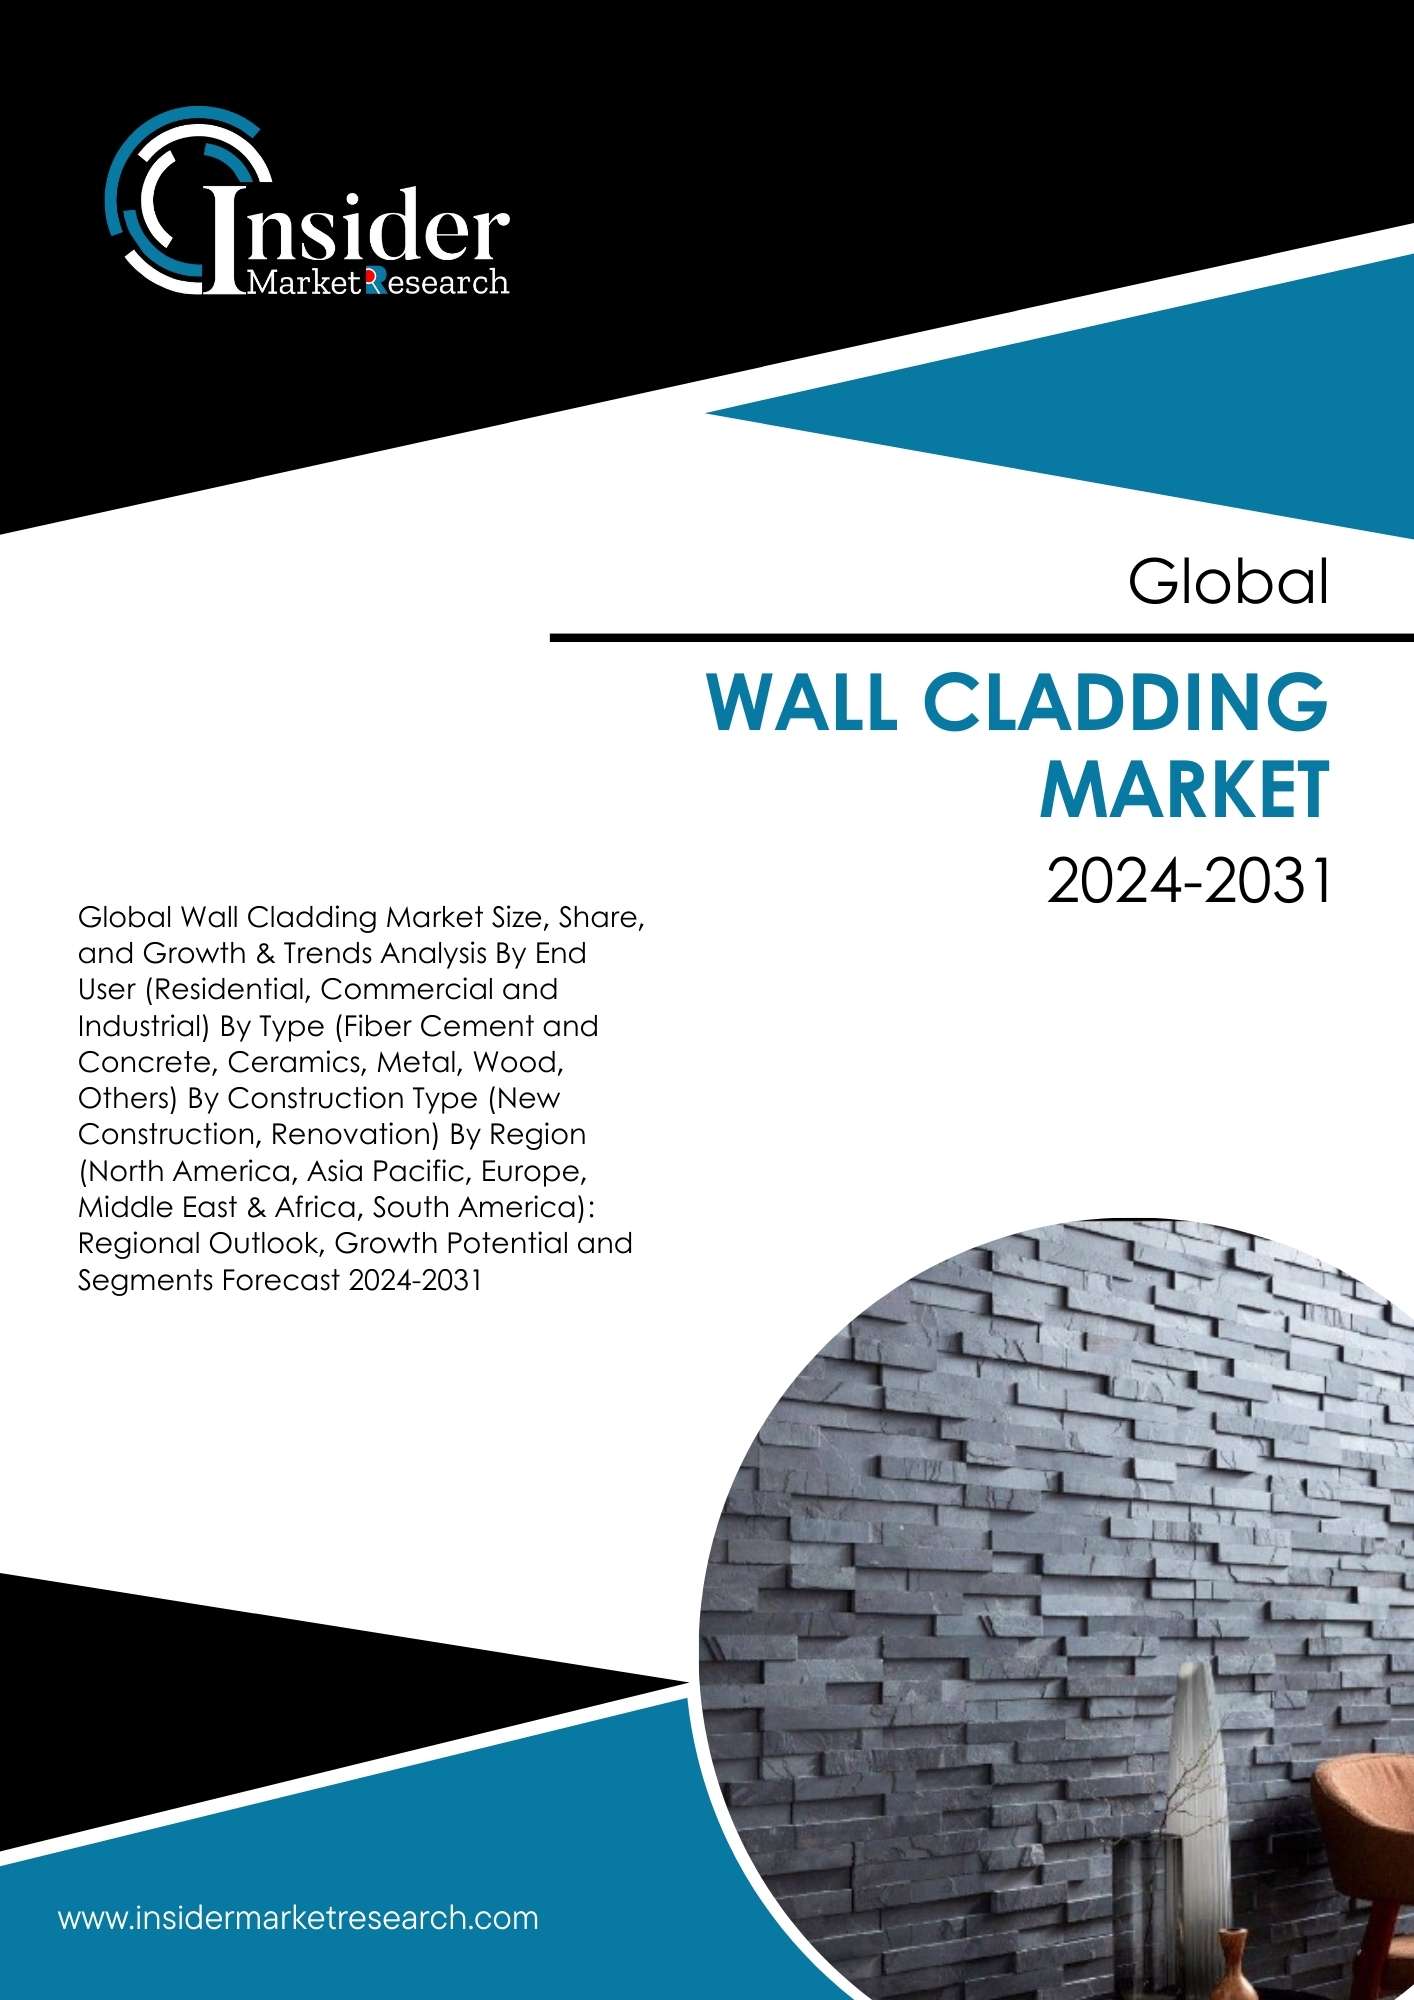 Wall Cladding Market Size, Share, Growth and Forecast to 2031 | Insider Market Research